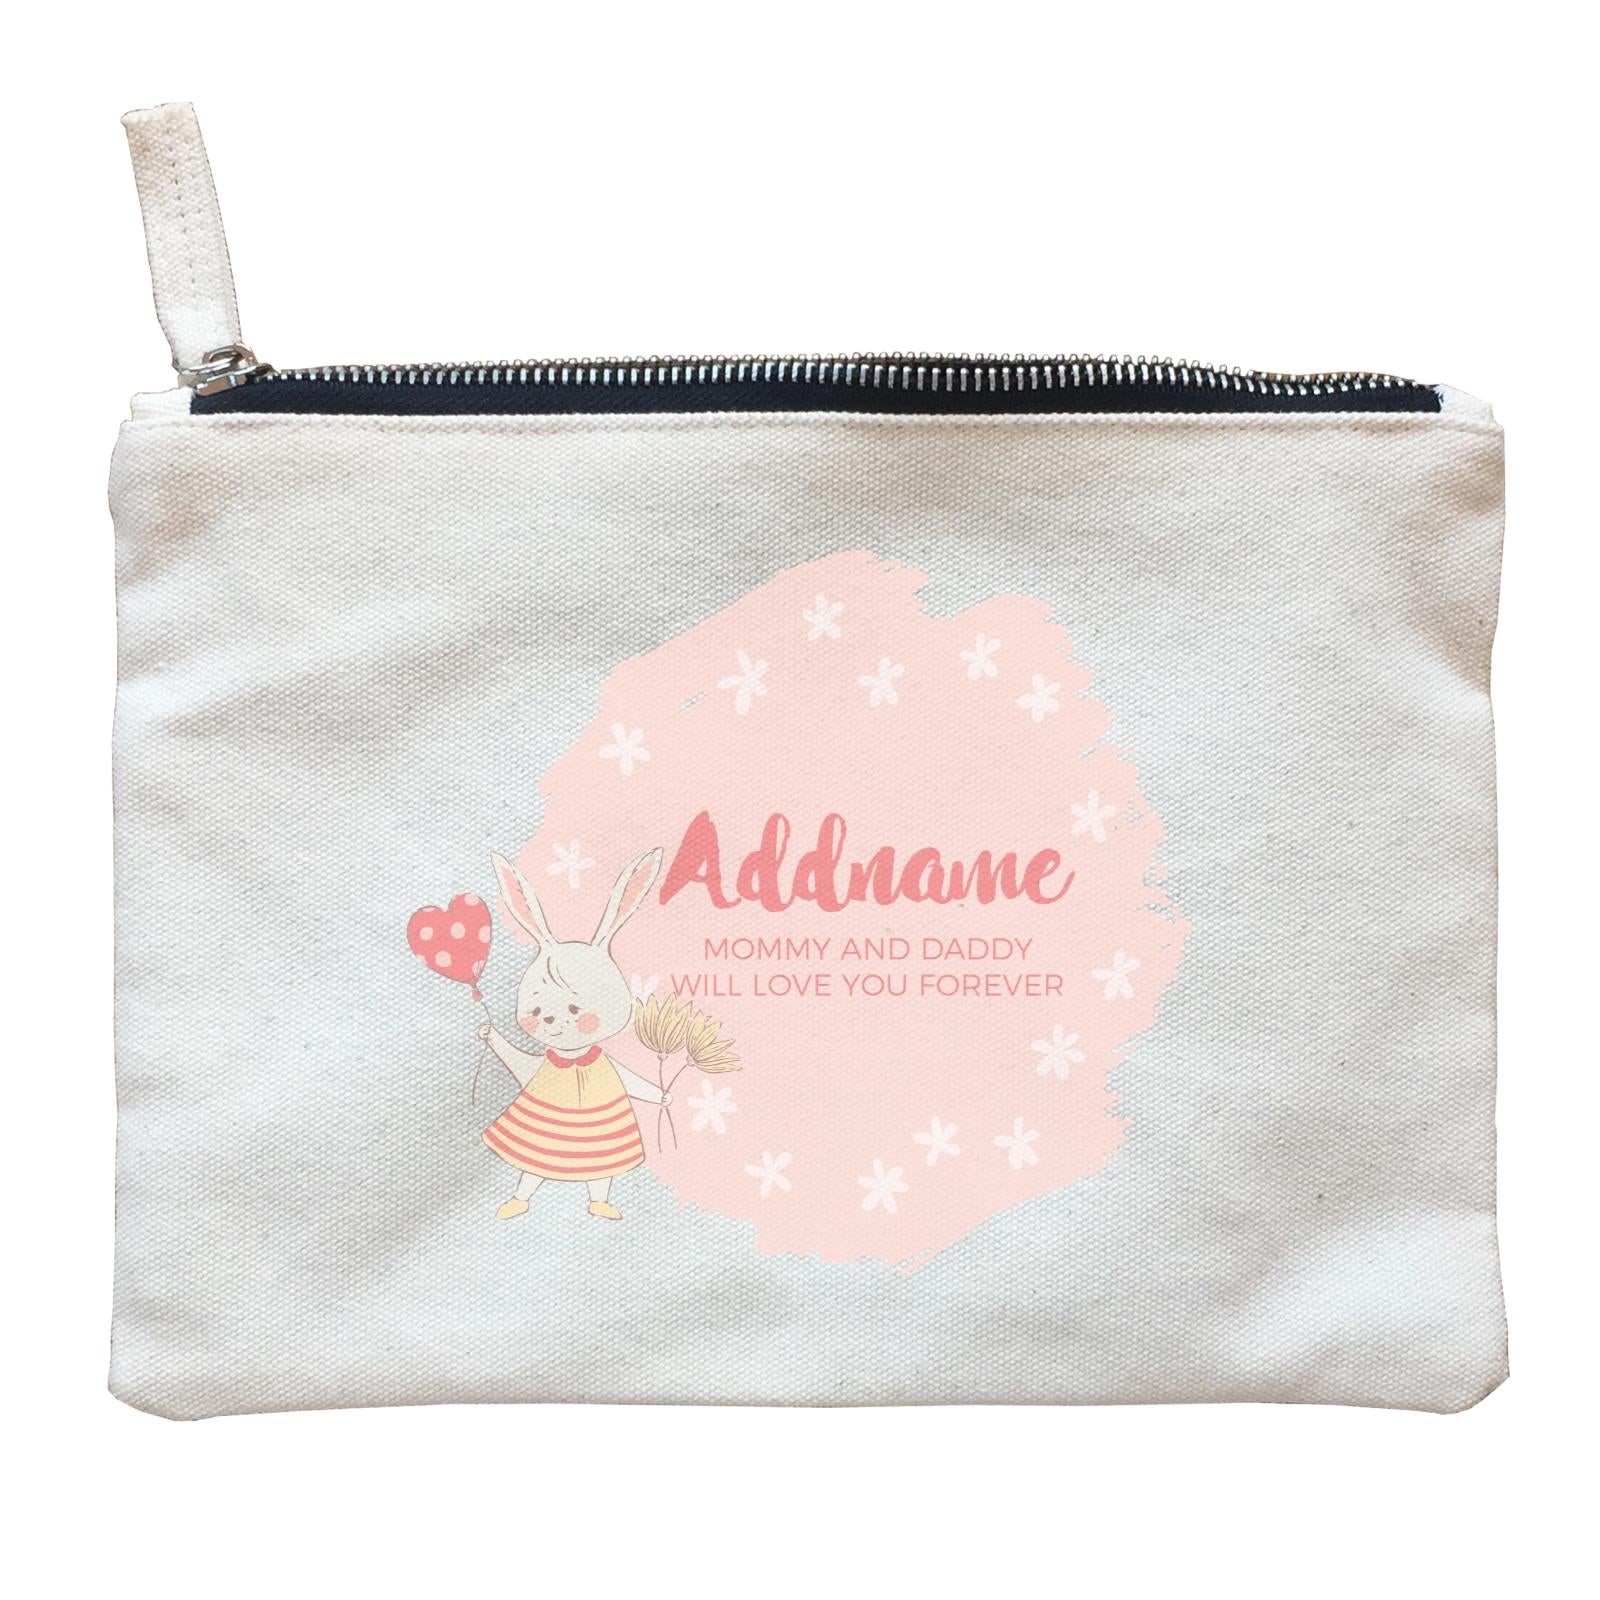 Cute Girl Rabbit with Heart Balloon Personalizable with Name and Text Zipper Pouch